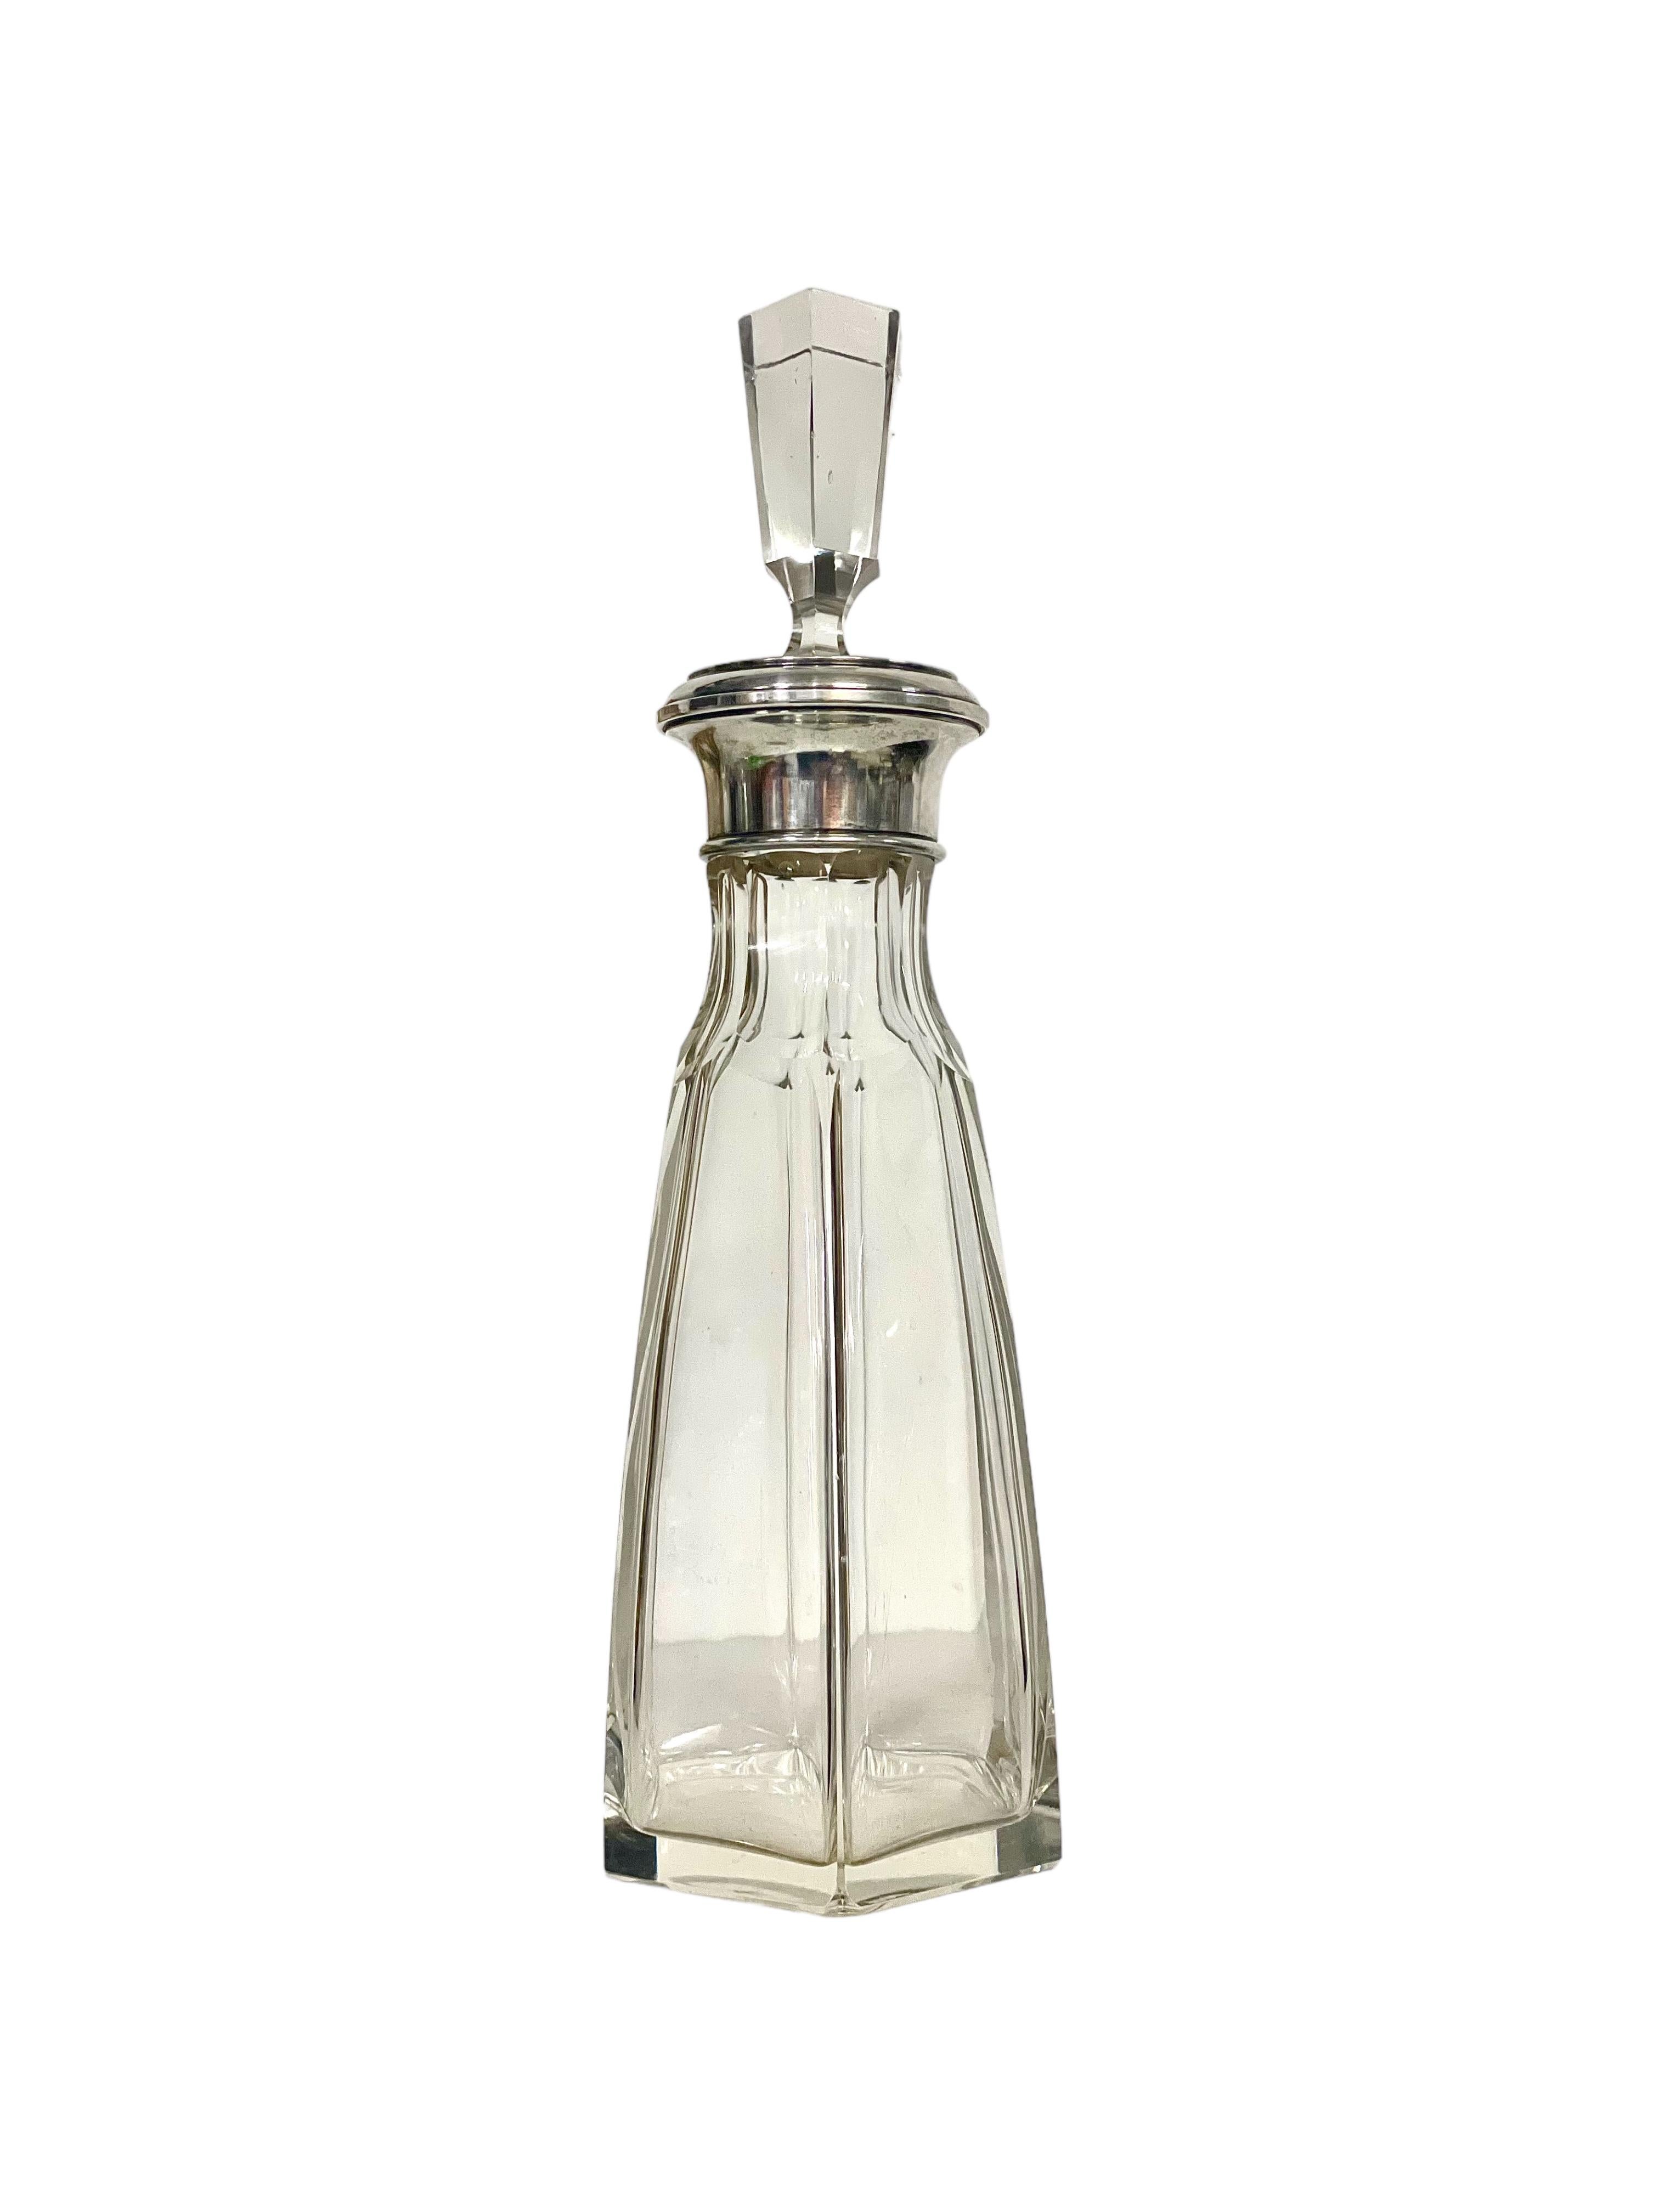 A very stylish cut crystal lidded decanter made by renowned crystal manufacturer Baccarat. This vintage piece of classic barware features a silver-plated collar and oversized stopper, its faceted sides cut to echo those of the decanter. Taking the